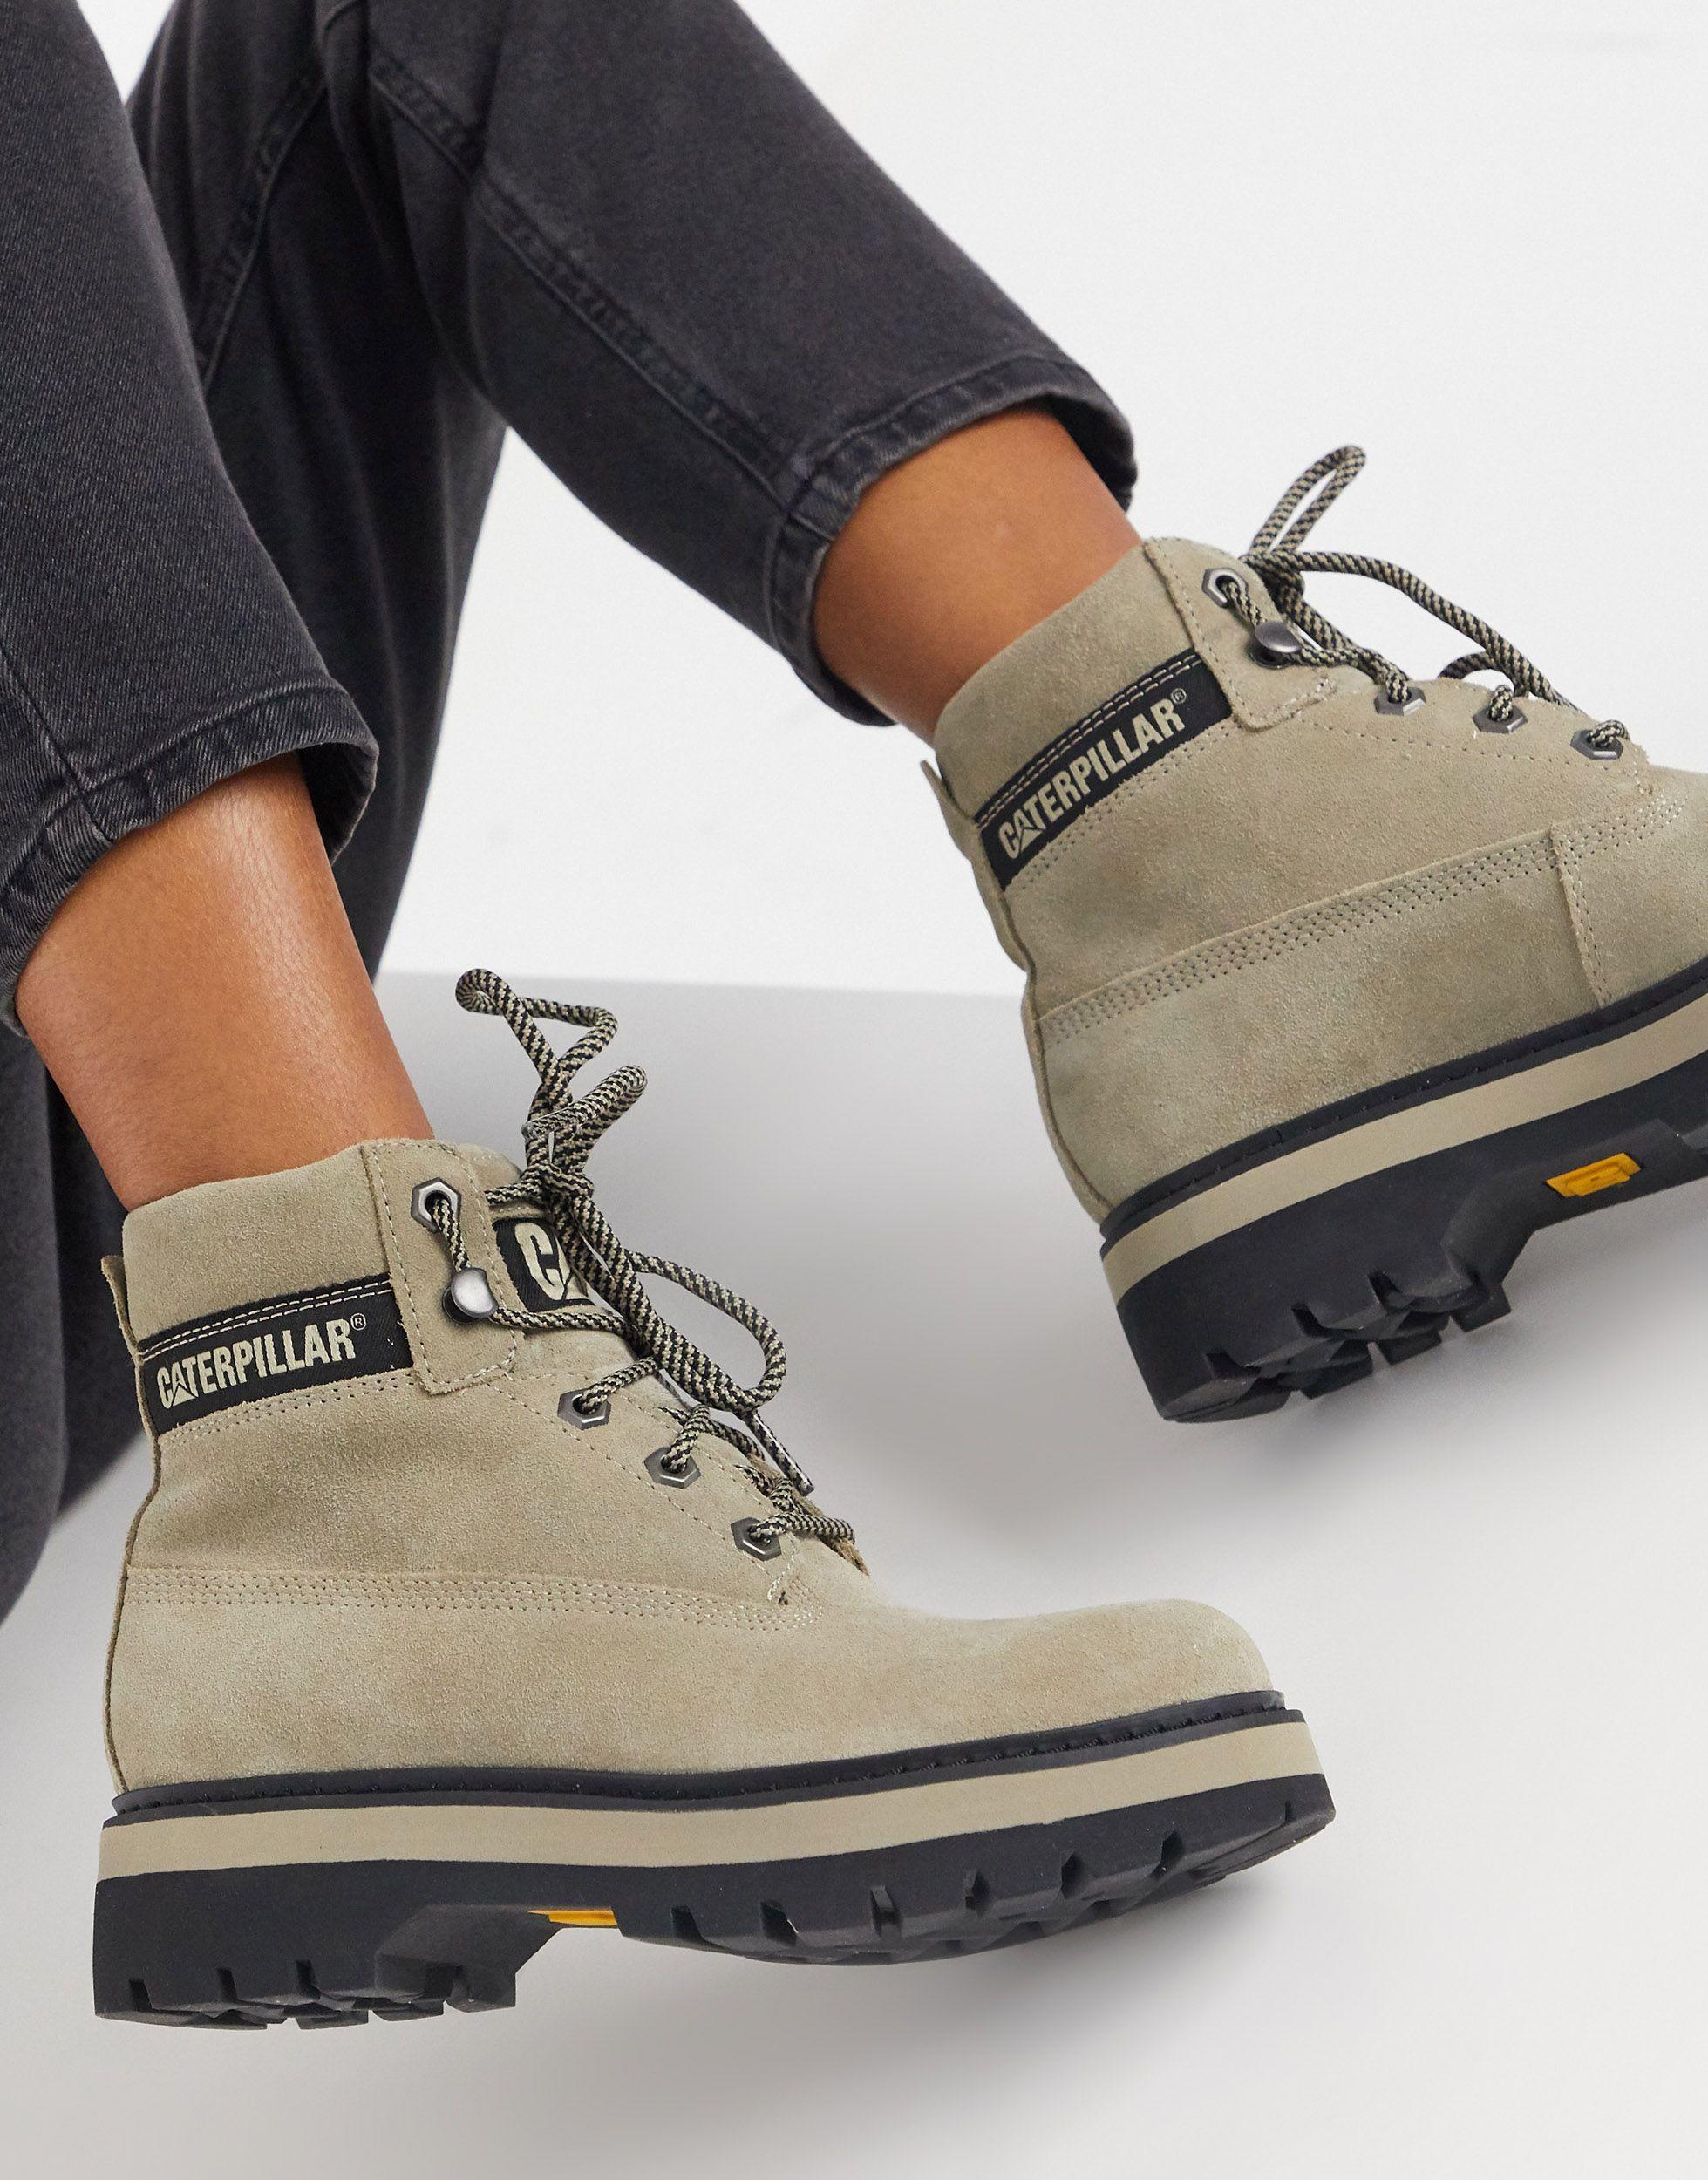 Caterpillar Cat Mimicry Flatform Lace Up Hiking Boots in Natural | Lyst UK